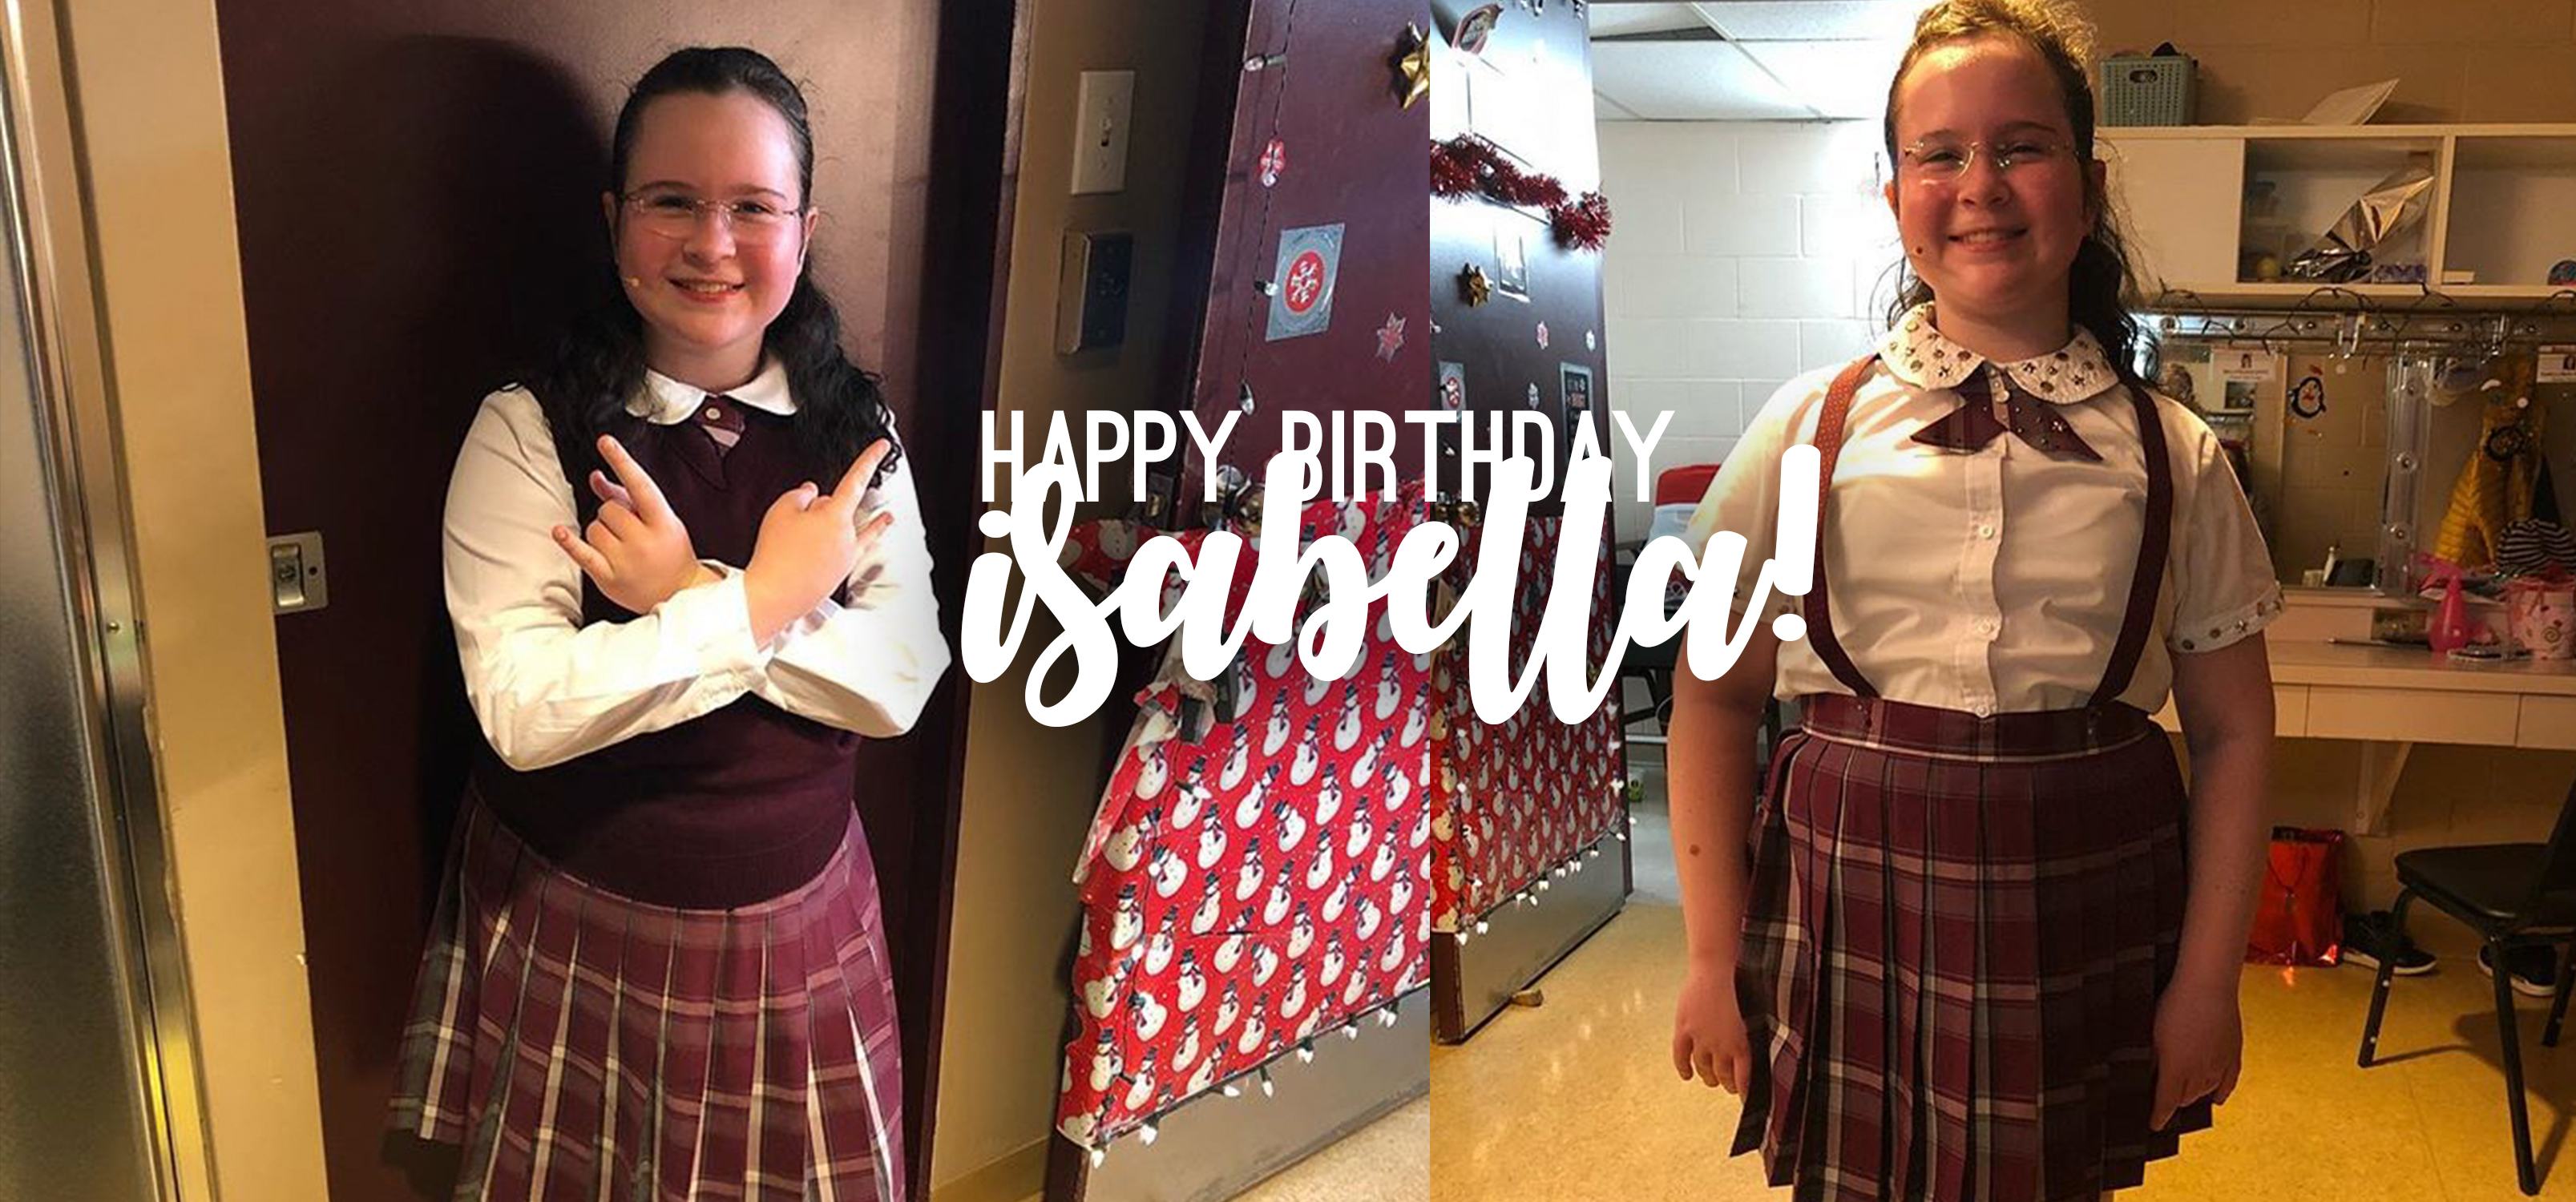 Happy Belated Birthday to Isabella Rose Sky, ONCE ON THIS ISLAND to Hold Equity Principal Audition, and more!